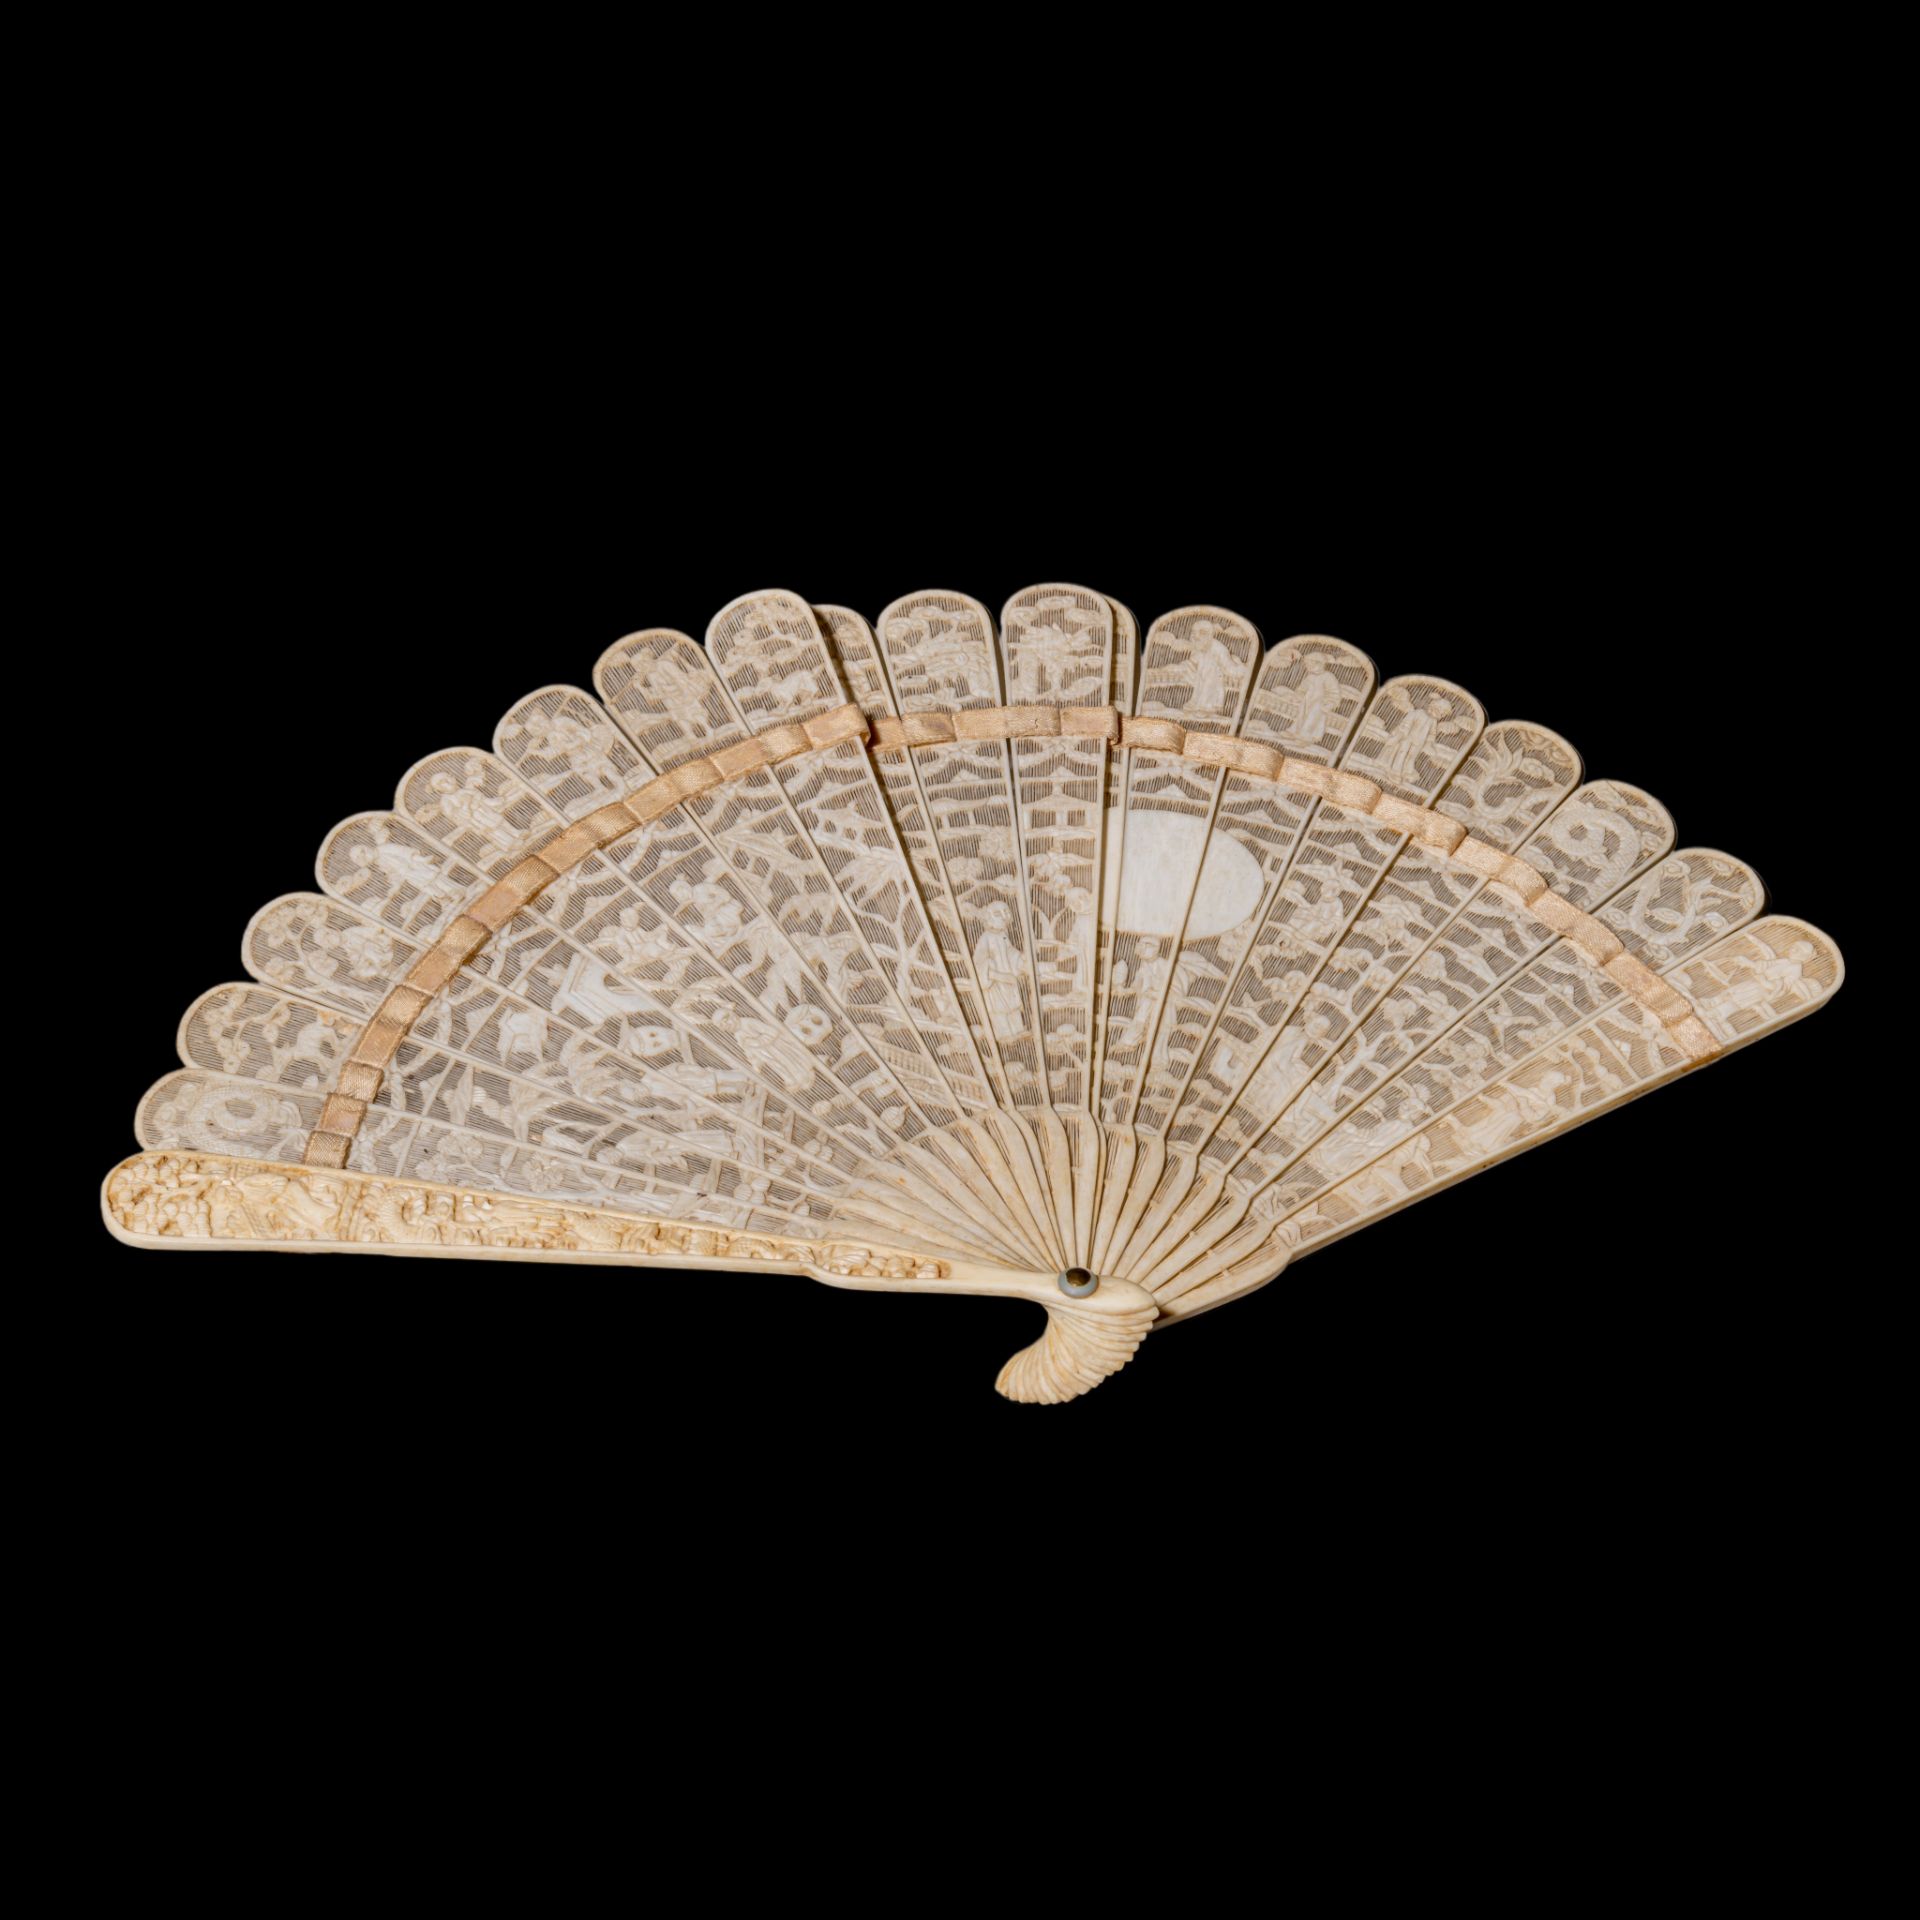 Three Chinese late Qing / early Republic ivory fans, H 16,4 - 19,4 - 20,3 cm / 39 - 77 - 54 g. - W f - Bild 10 aus 12